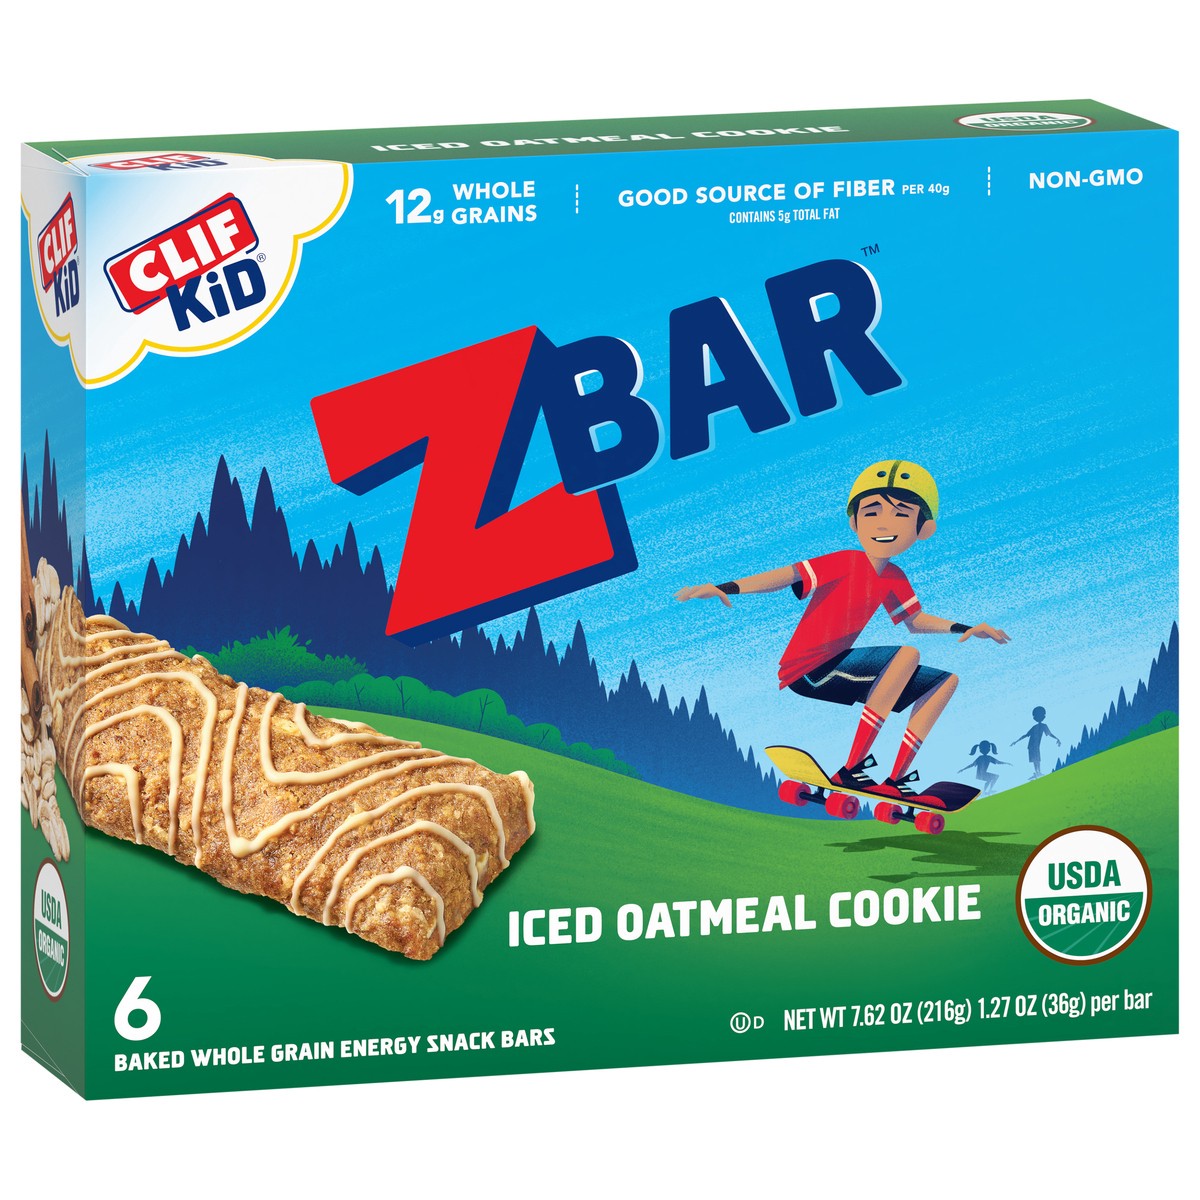 slide 2 of 9, Zbar - Iced Oatmeal Cookie - Soft Baked Whole Grain Snack Bars - USDA Organic - Non-GMO - Plant-Based - 1.27 oz. (6 Pack), 7.62 oz